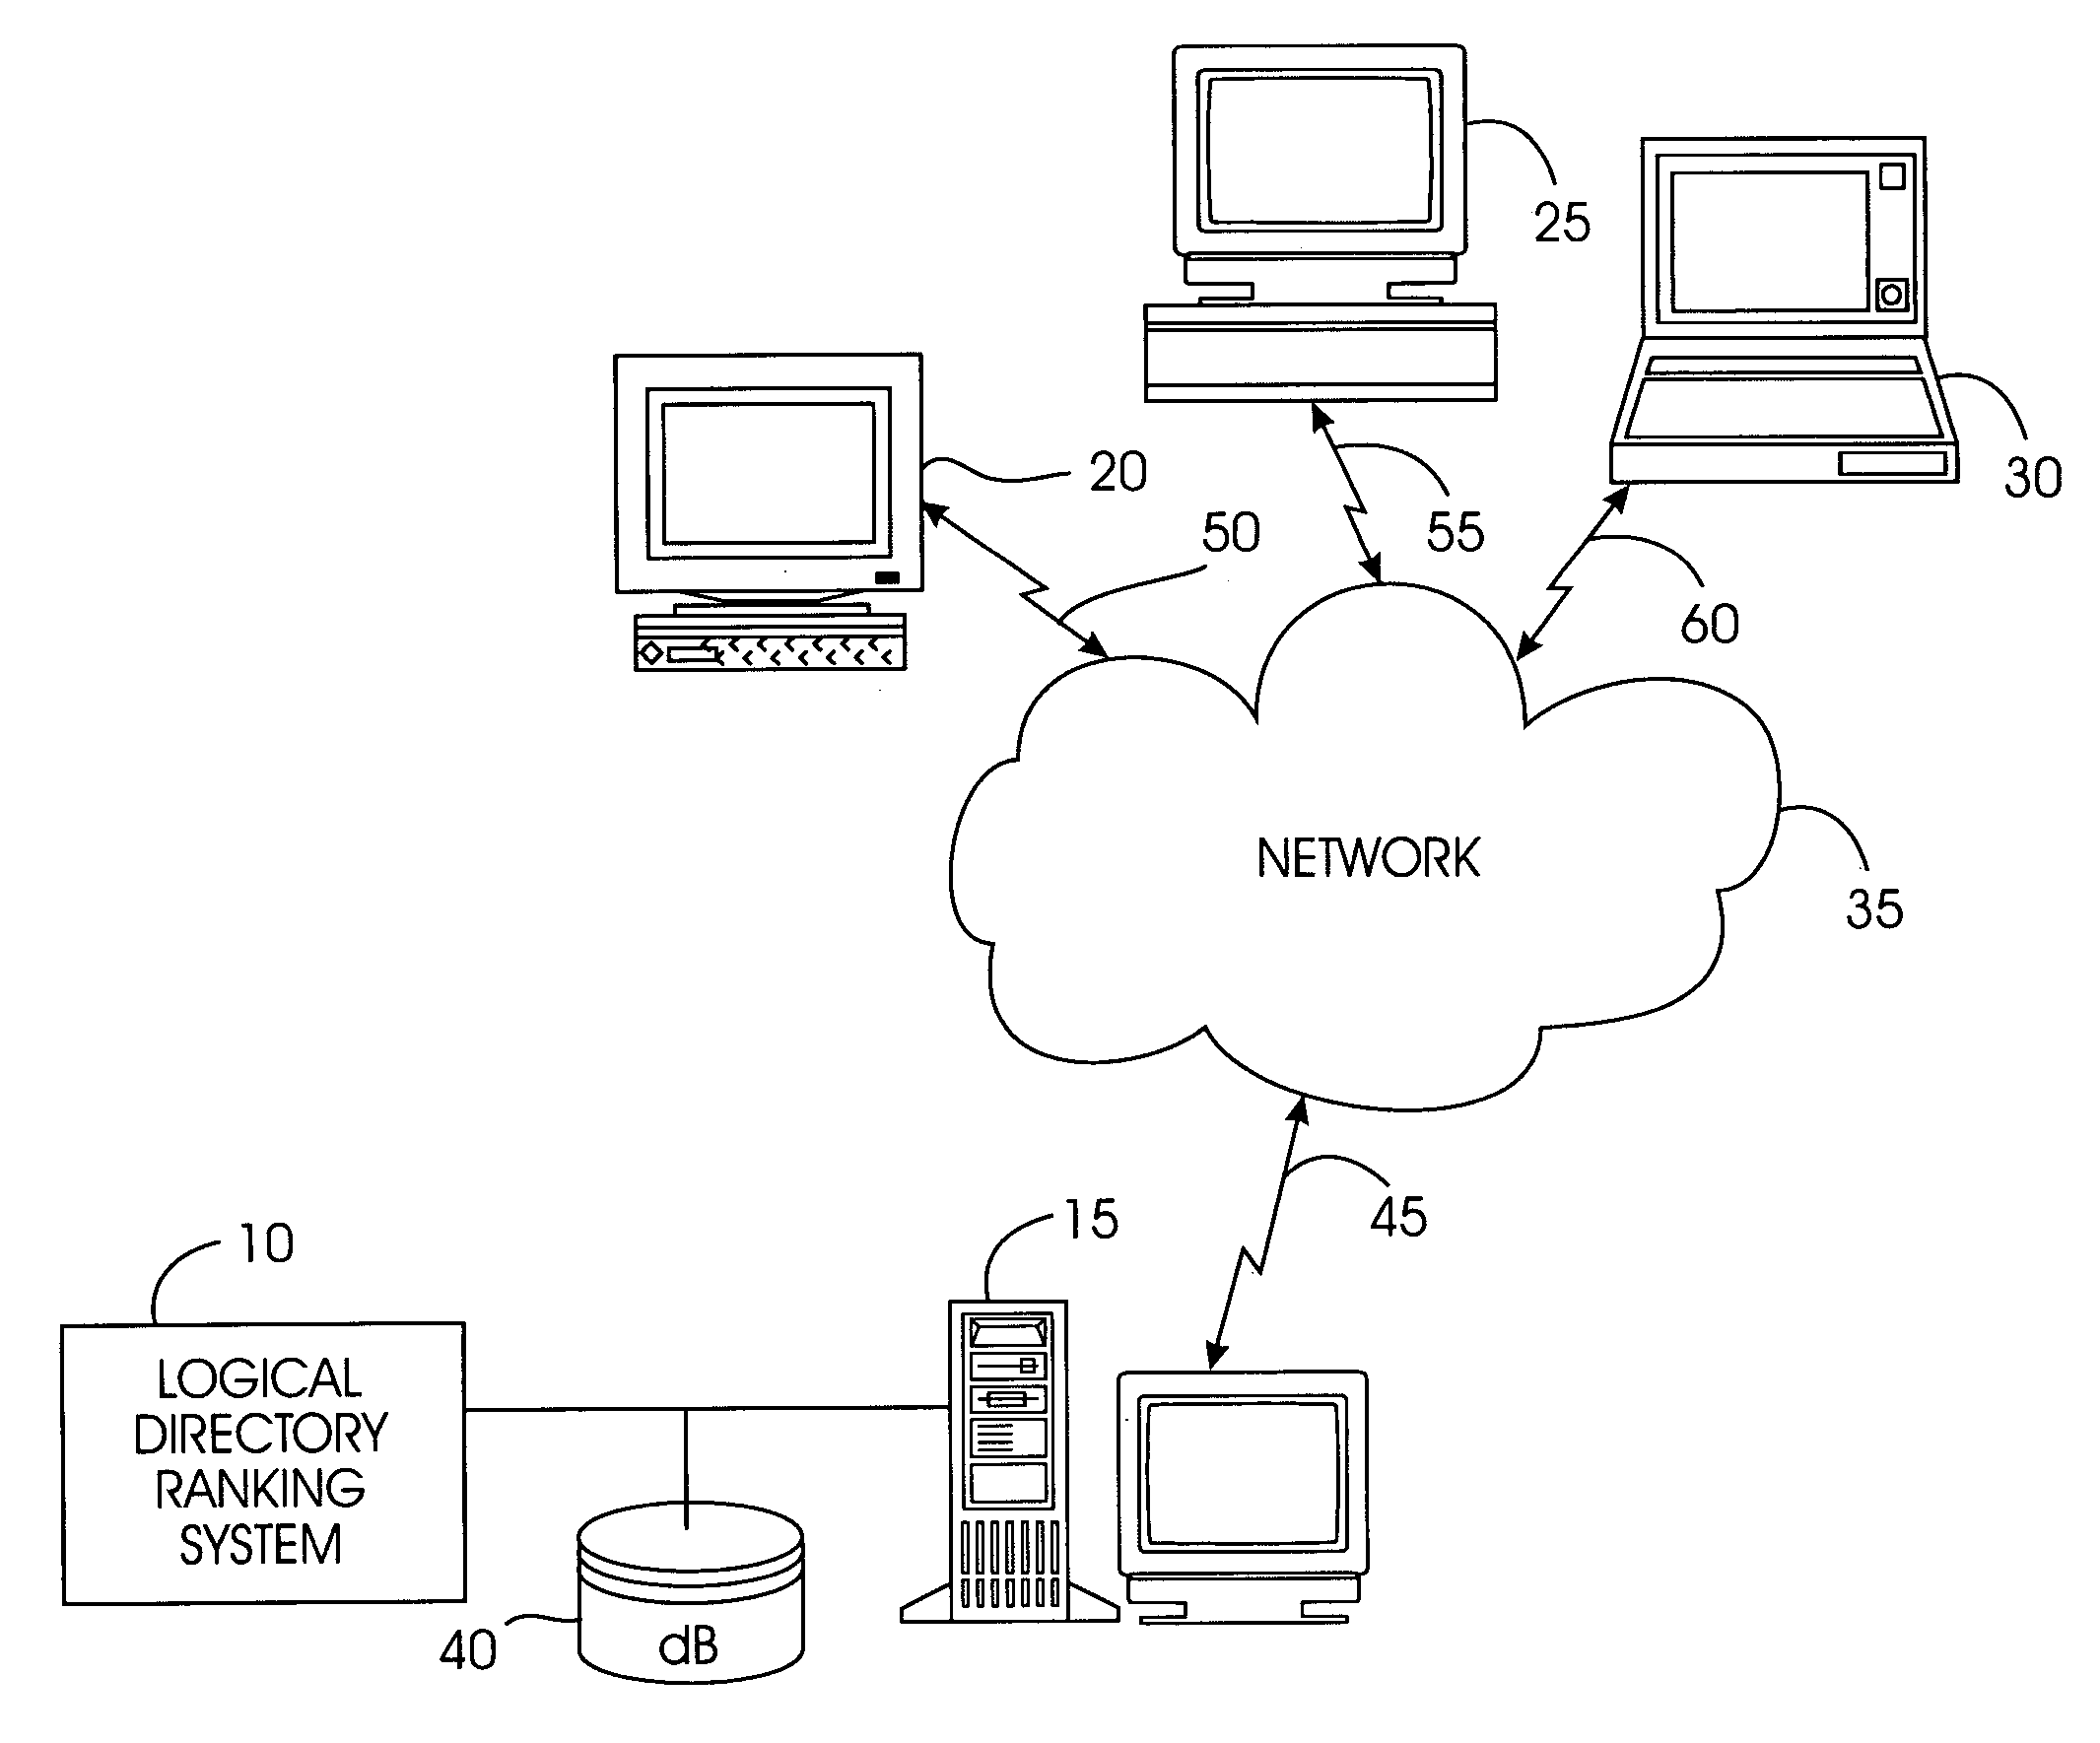 System and method for ranking logical directories